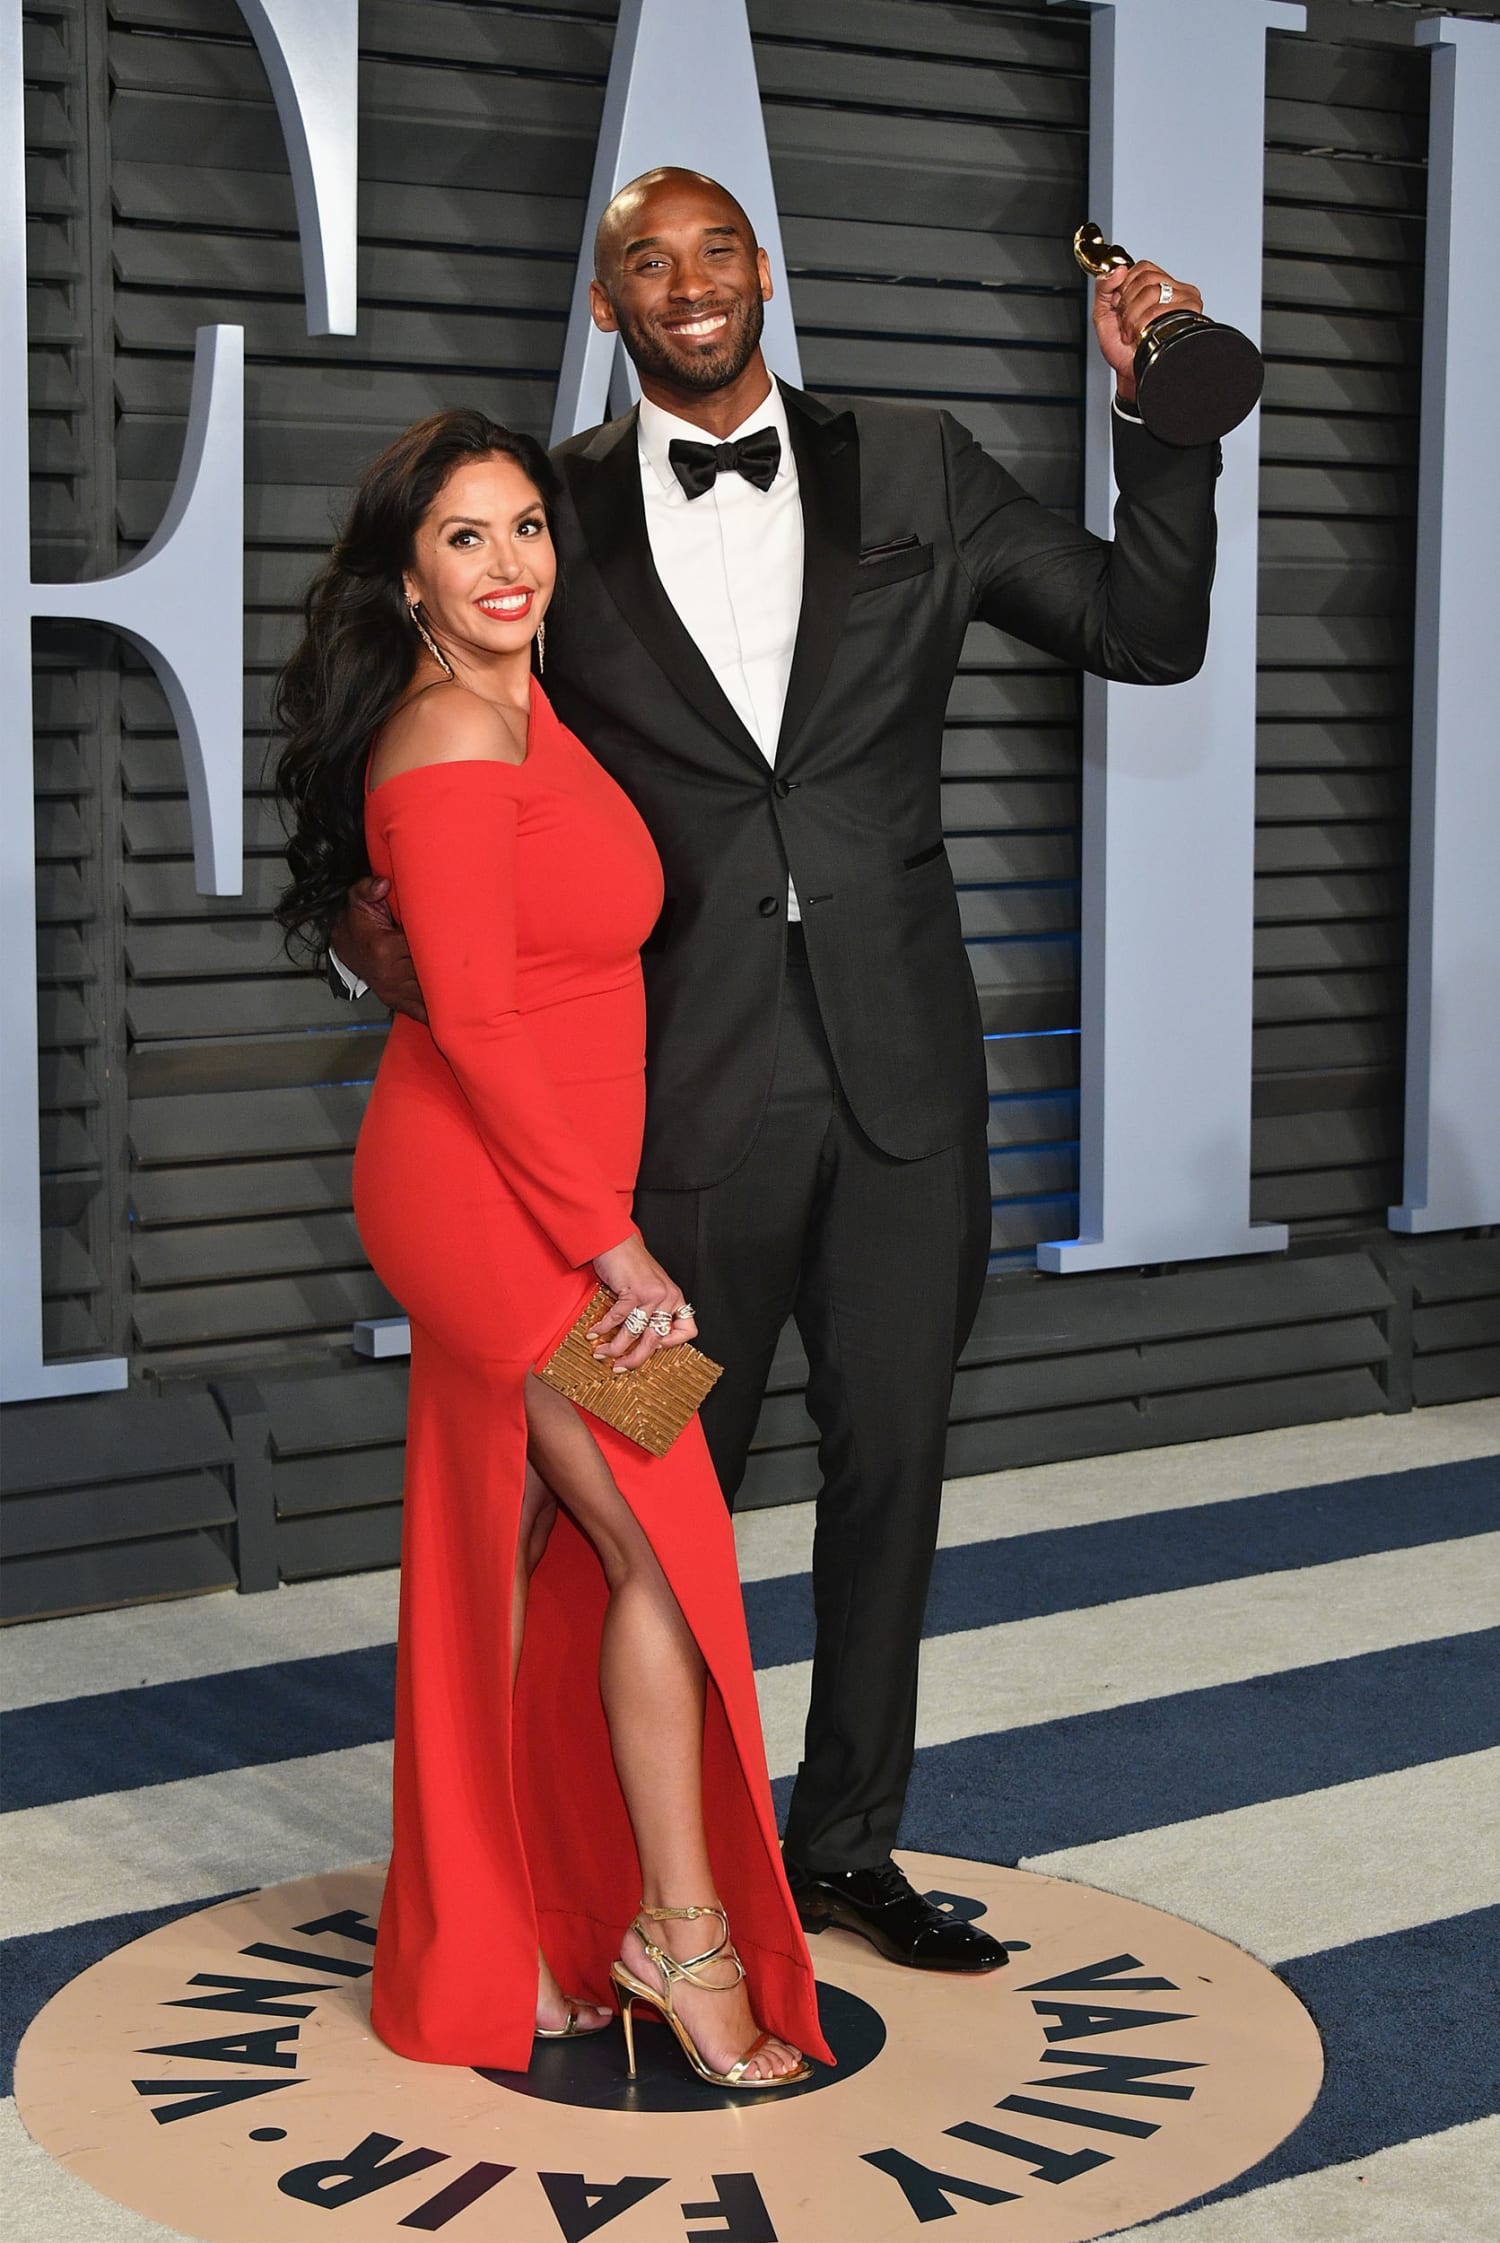 Kobe Bryant dons dapper teal suit as wife Vanessa wears matching green